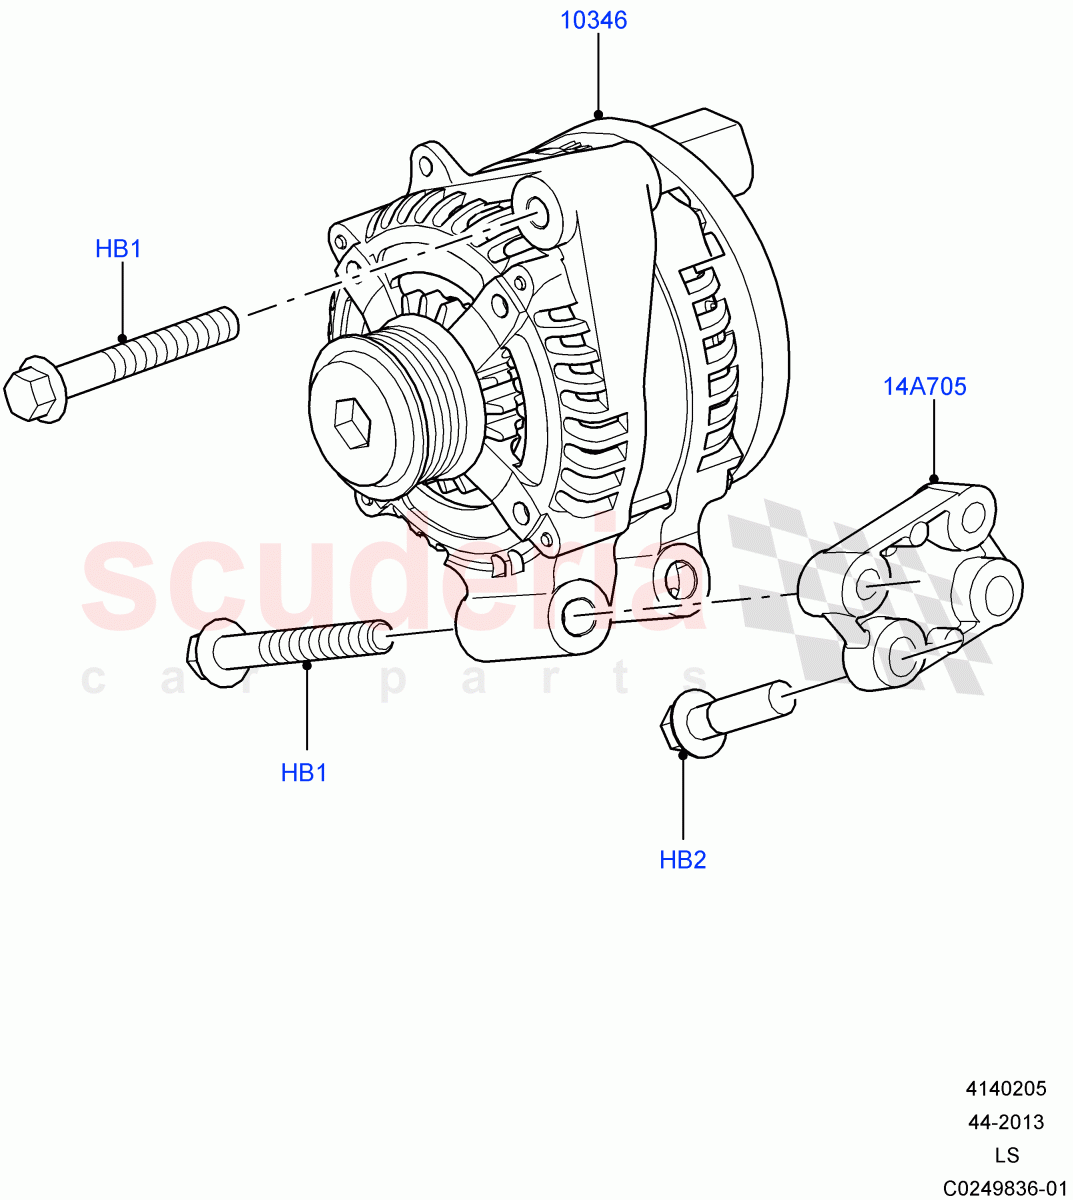 Alternator And Mountings(3.0L DOHC GDI SC V6 PETROL)((V)FROMEA000001) of Land Rover Land Rover Discovery 4 (2010-2016) [2.7 Diesel V6]